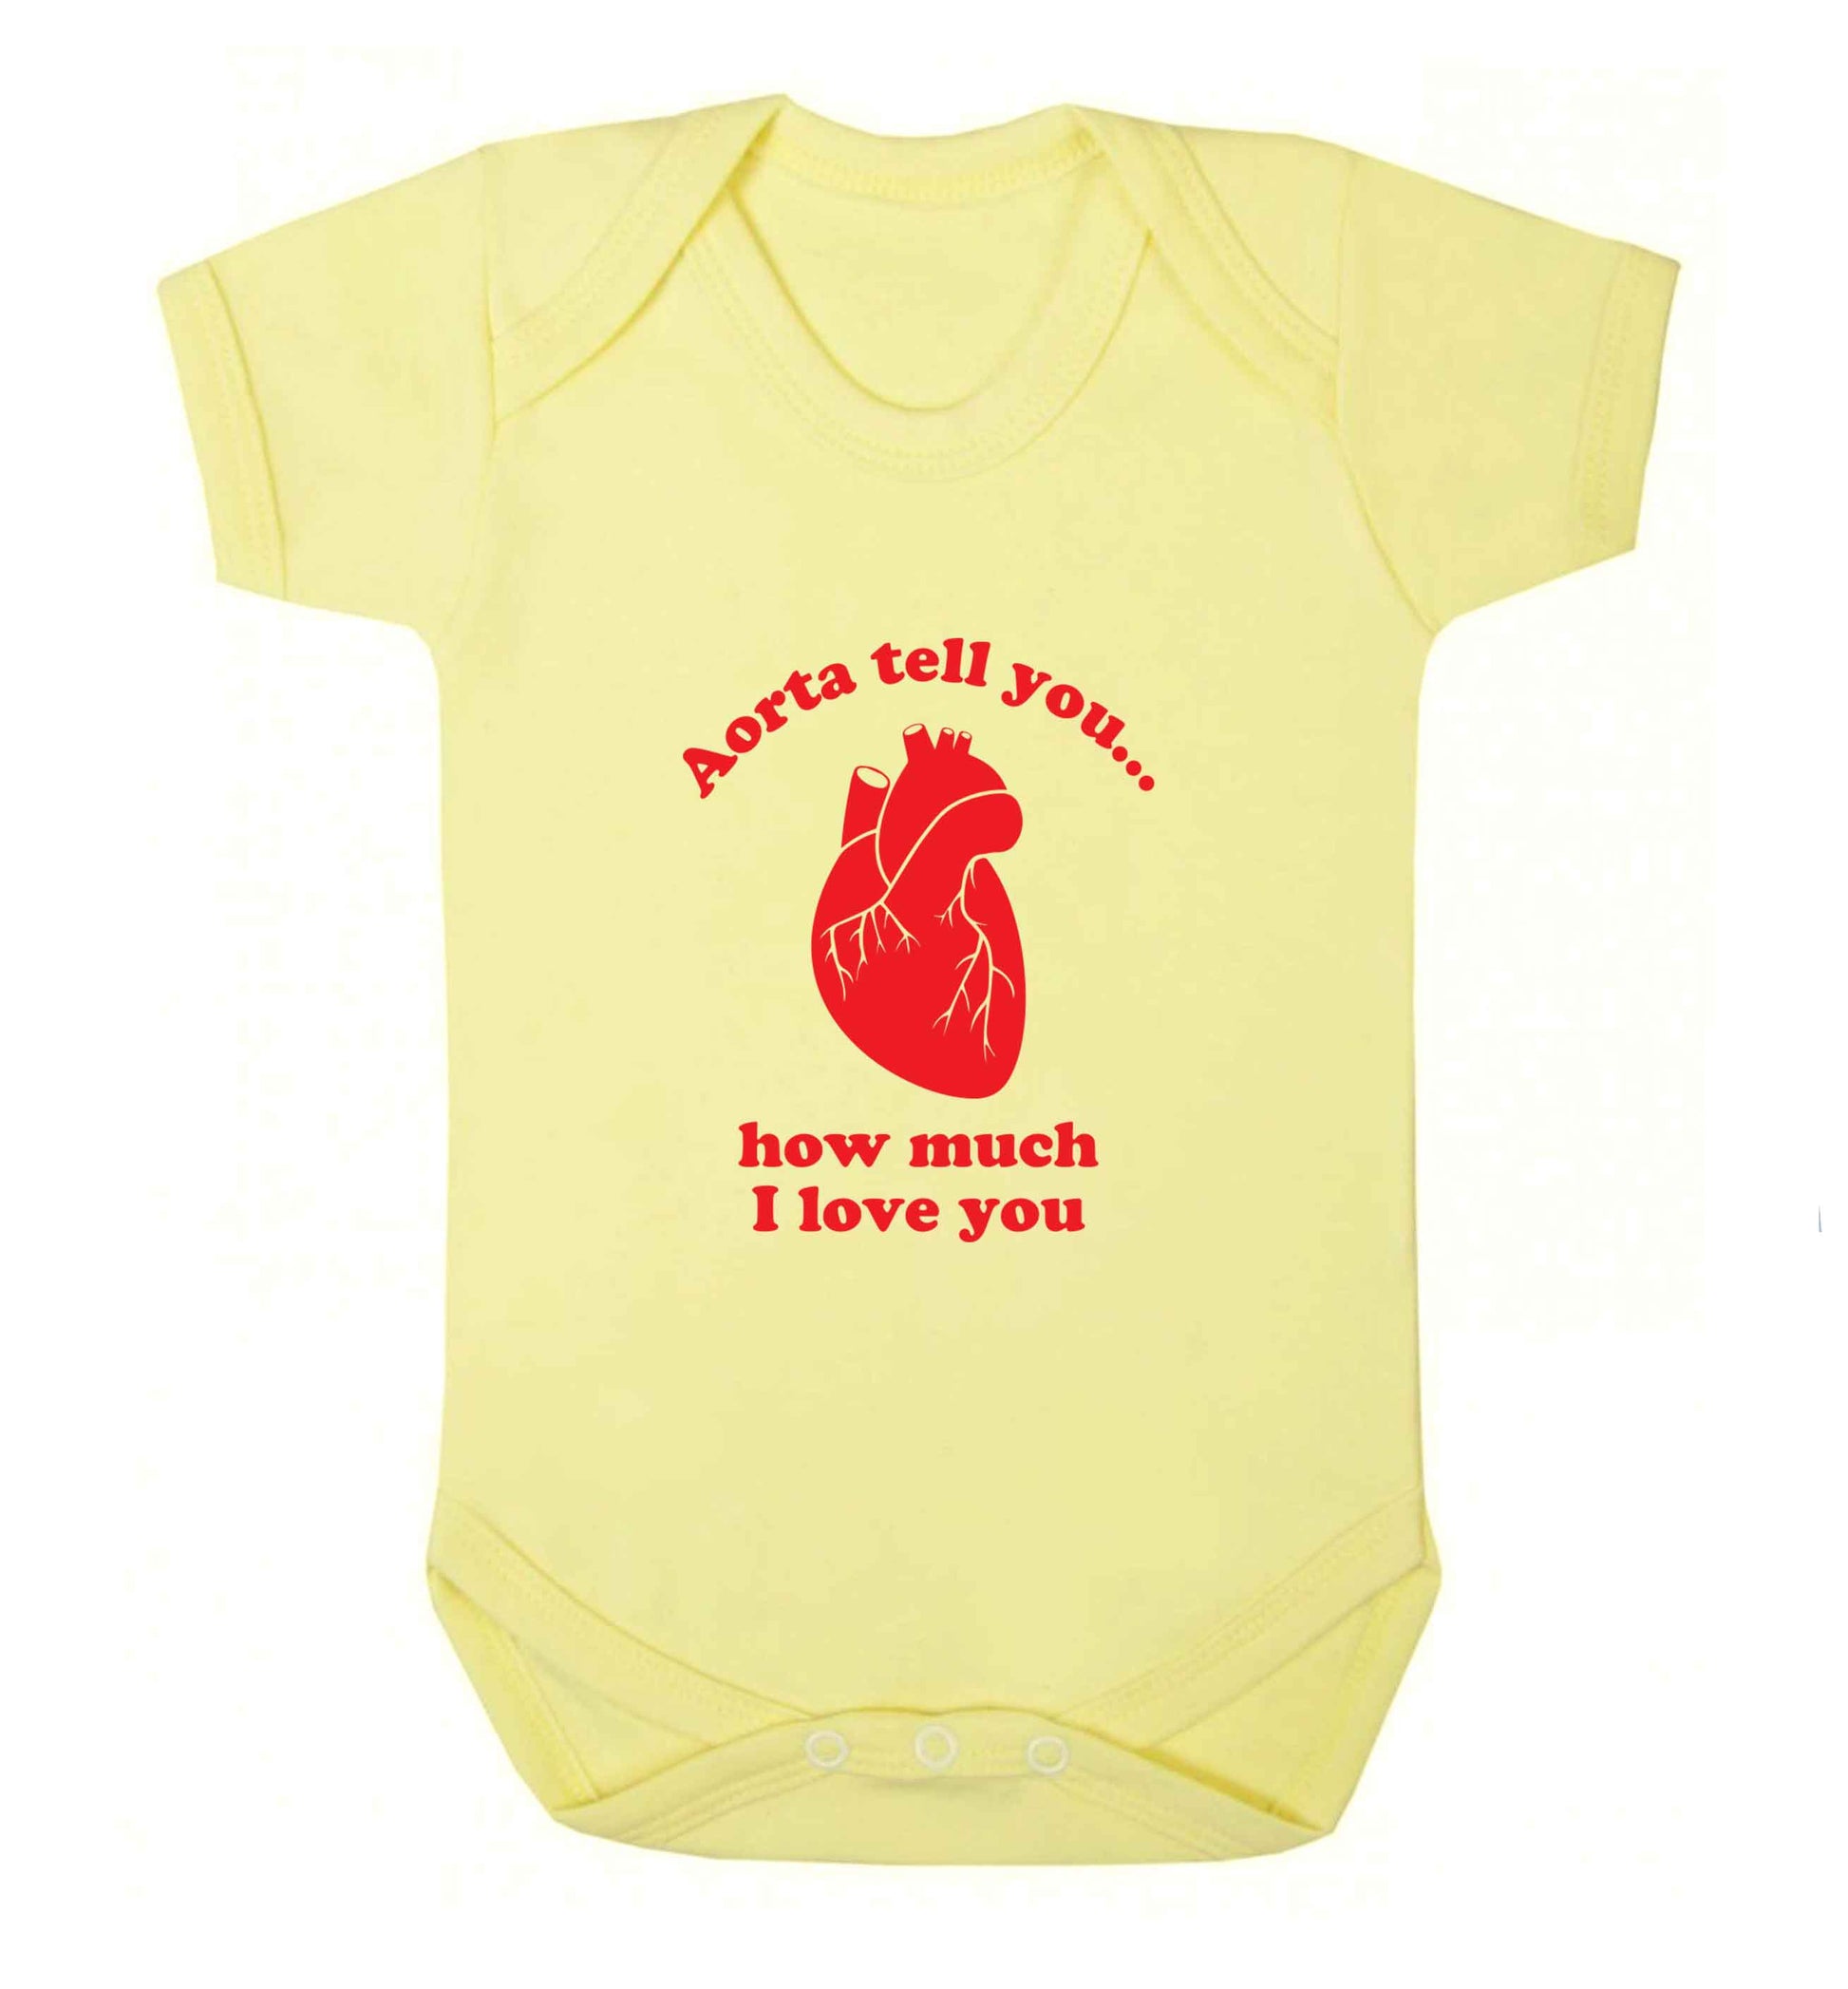 Aorta tell you how much I love you baby vest pale yellow 18-24 months